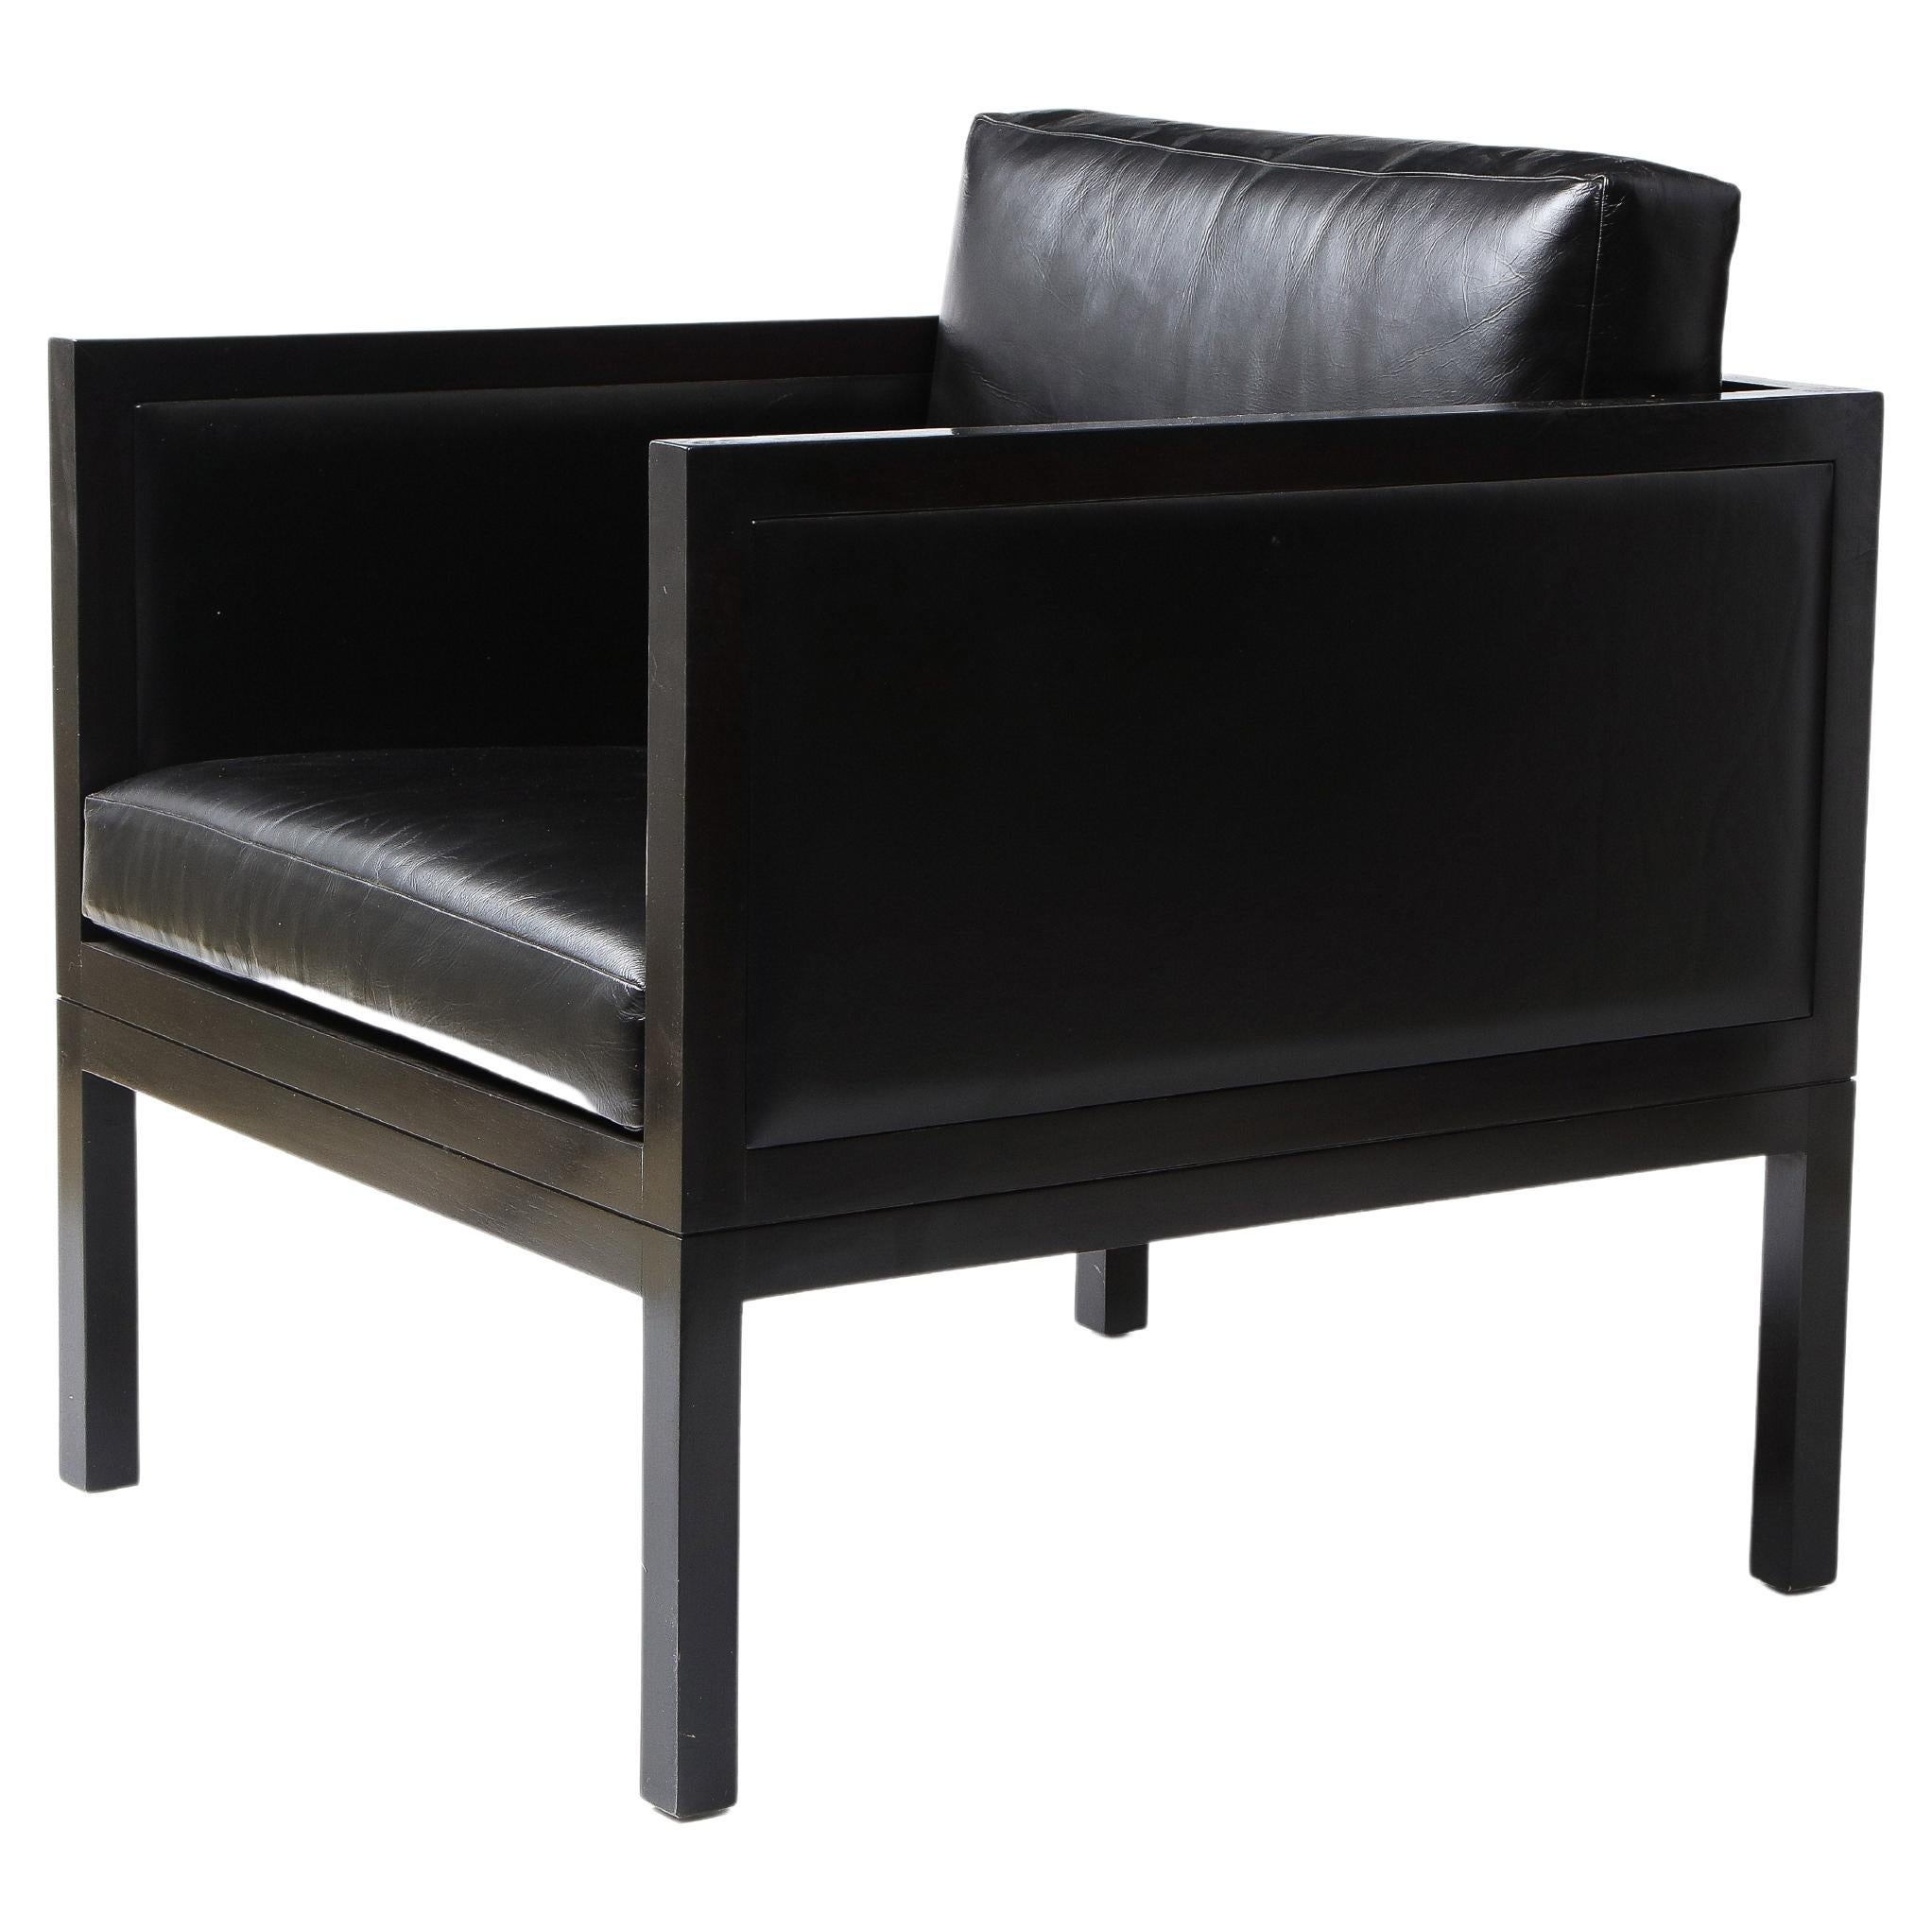 American MEIER/FERRER Modernist Leather, Wood and Metal Club Chair, USA 2010